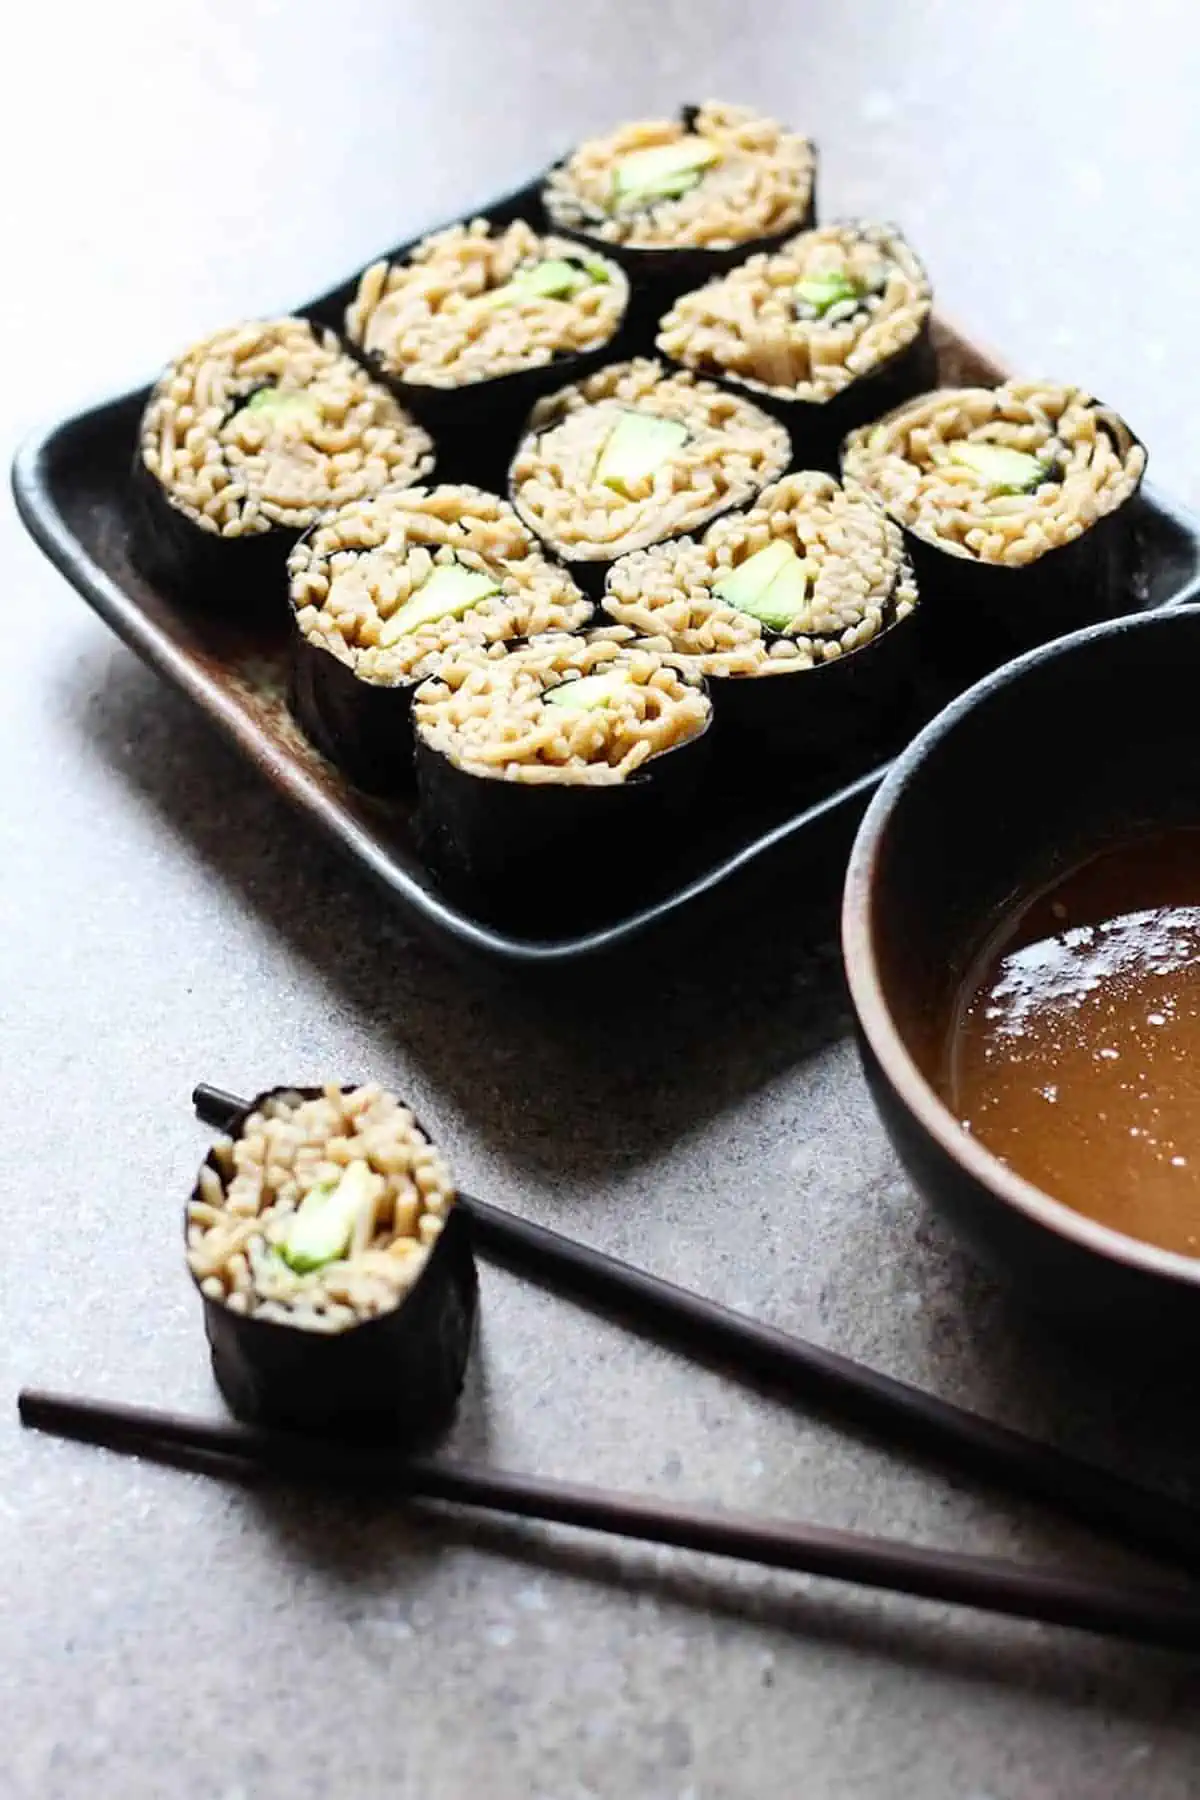 Maki rolls made with soba noodles instead of rice.